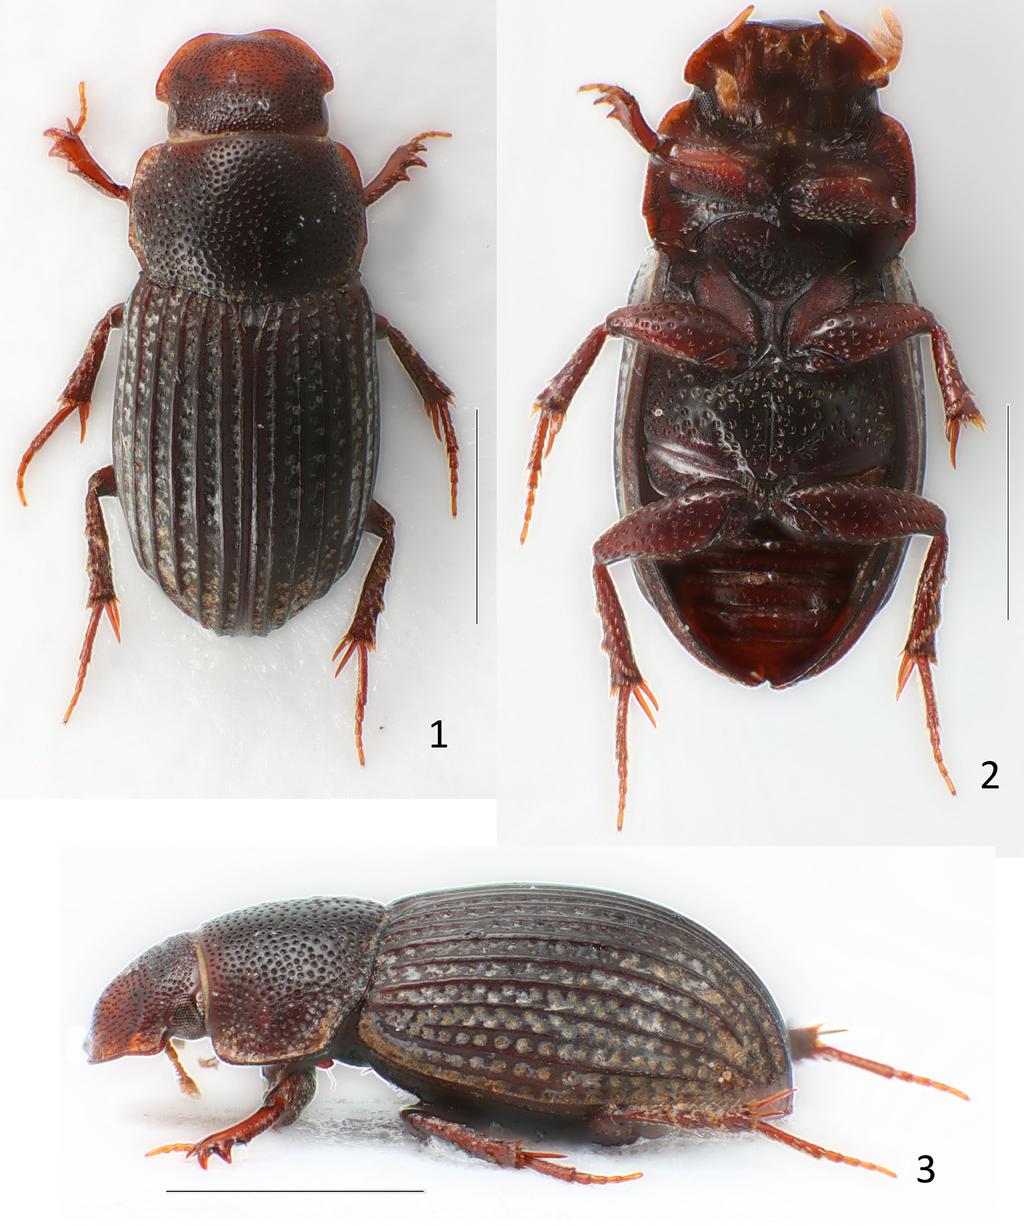 Figs. 1-3. Oxyomus kocoti sp. n.,, holotype: 1- dorsal view; 2- ventral view; 3- lateral view. Figs. 1-3: scale line: 1.0 mm.